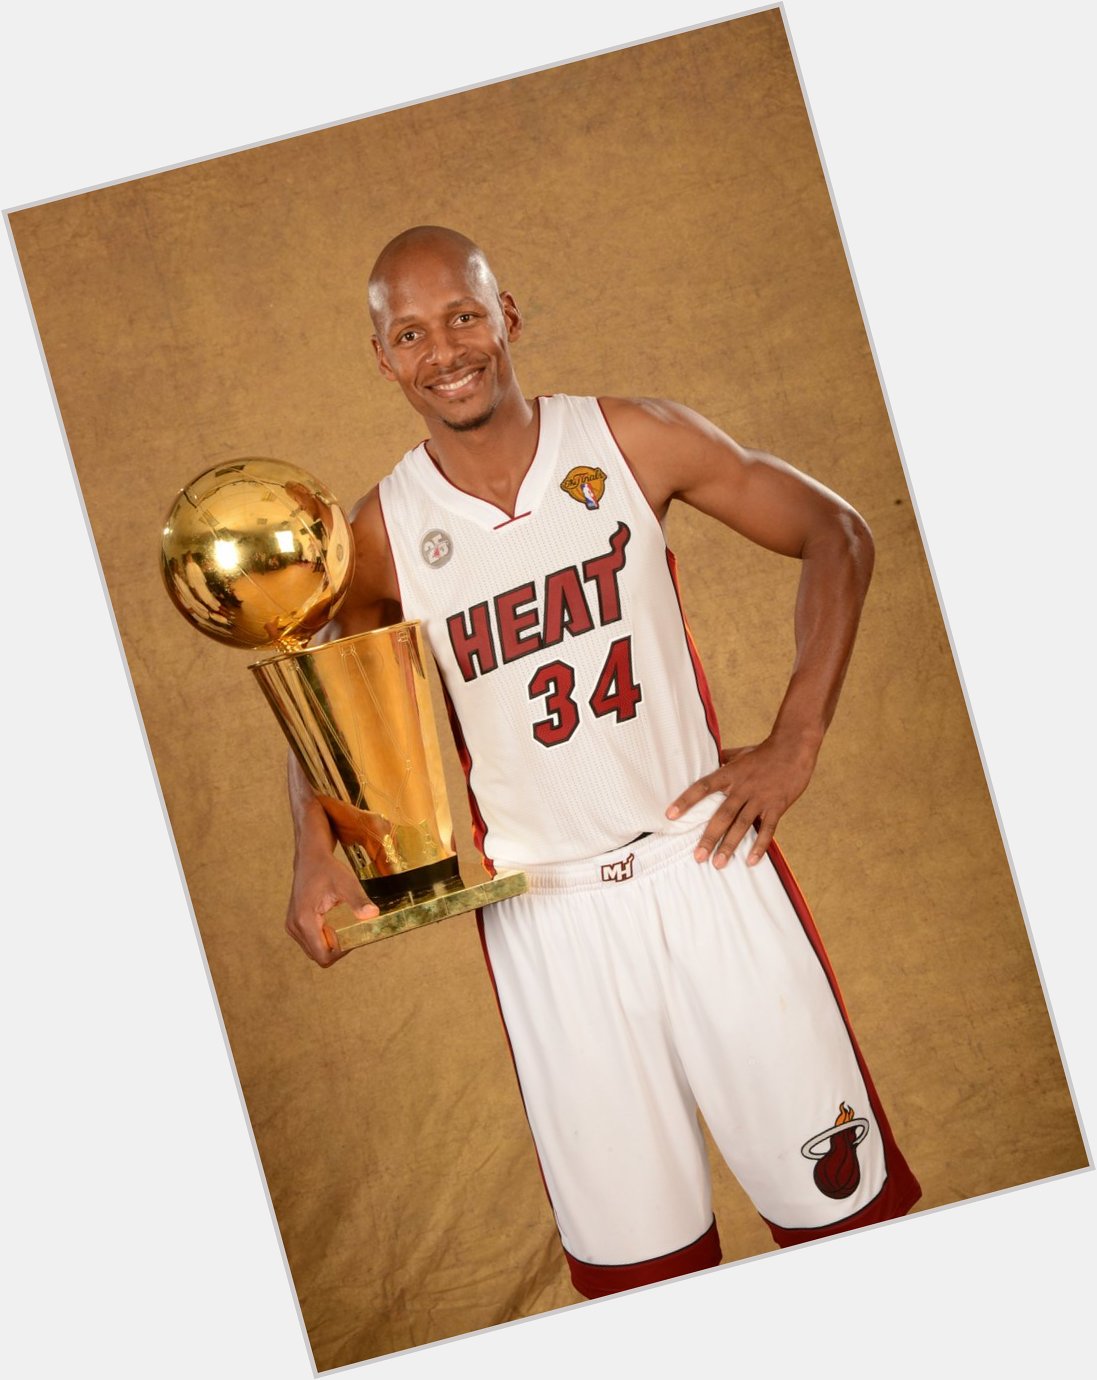  join us in wishing Ray Allen a Happy Birthday! 